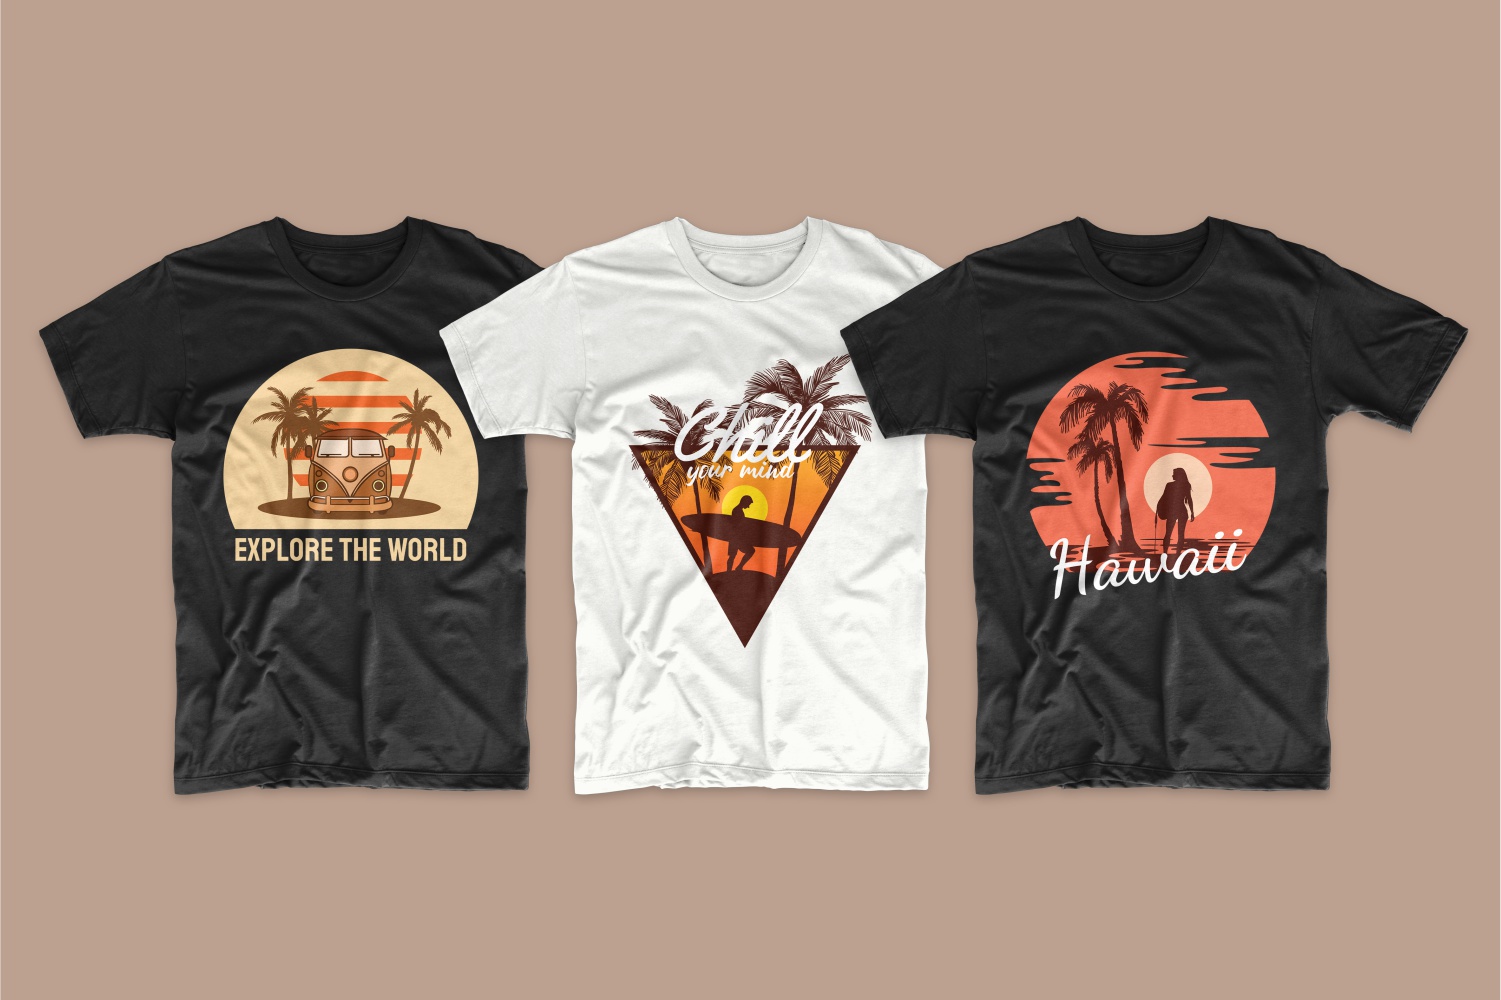 T-shirts with sunsets on the beaches in Hawaii.